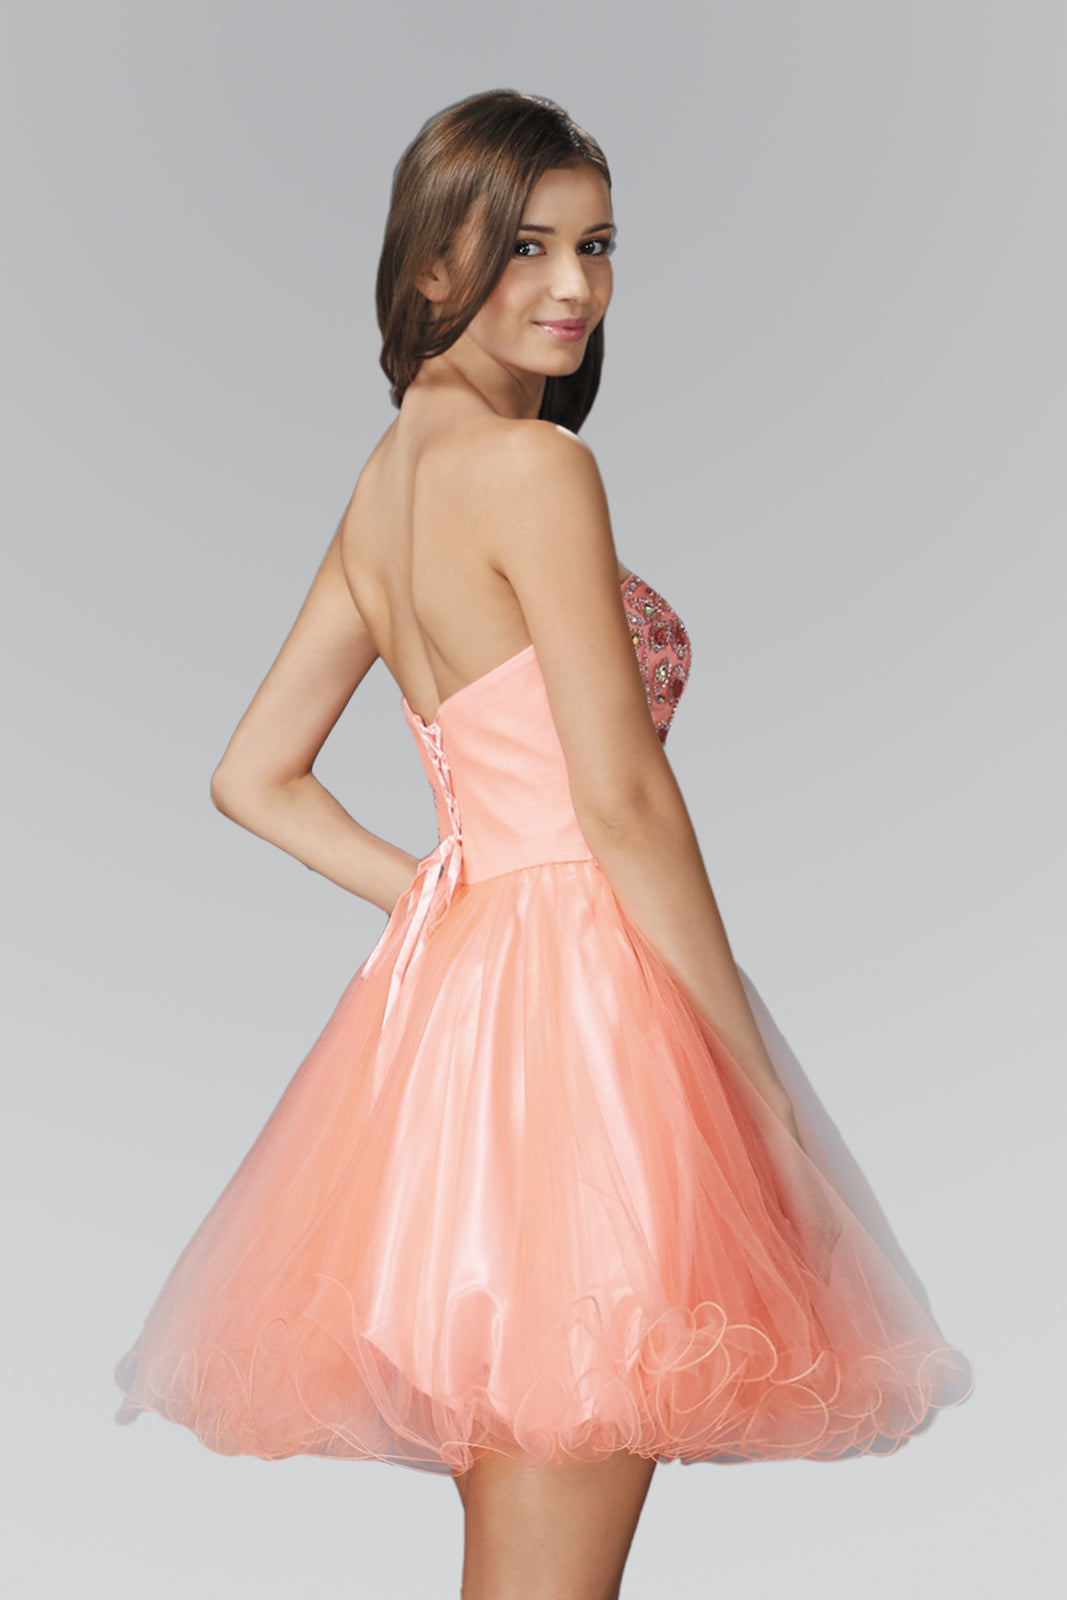 Strapless Sweetheart Tulle Short Dress with Jewel Embellished Bodice and Corset Back Detailing GLGS2132 Elsy Style HOMECOMING